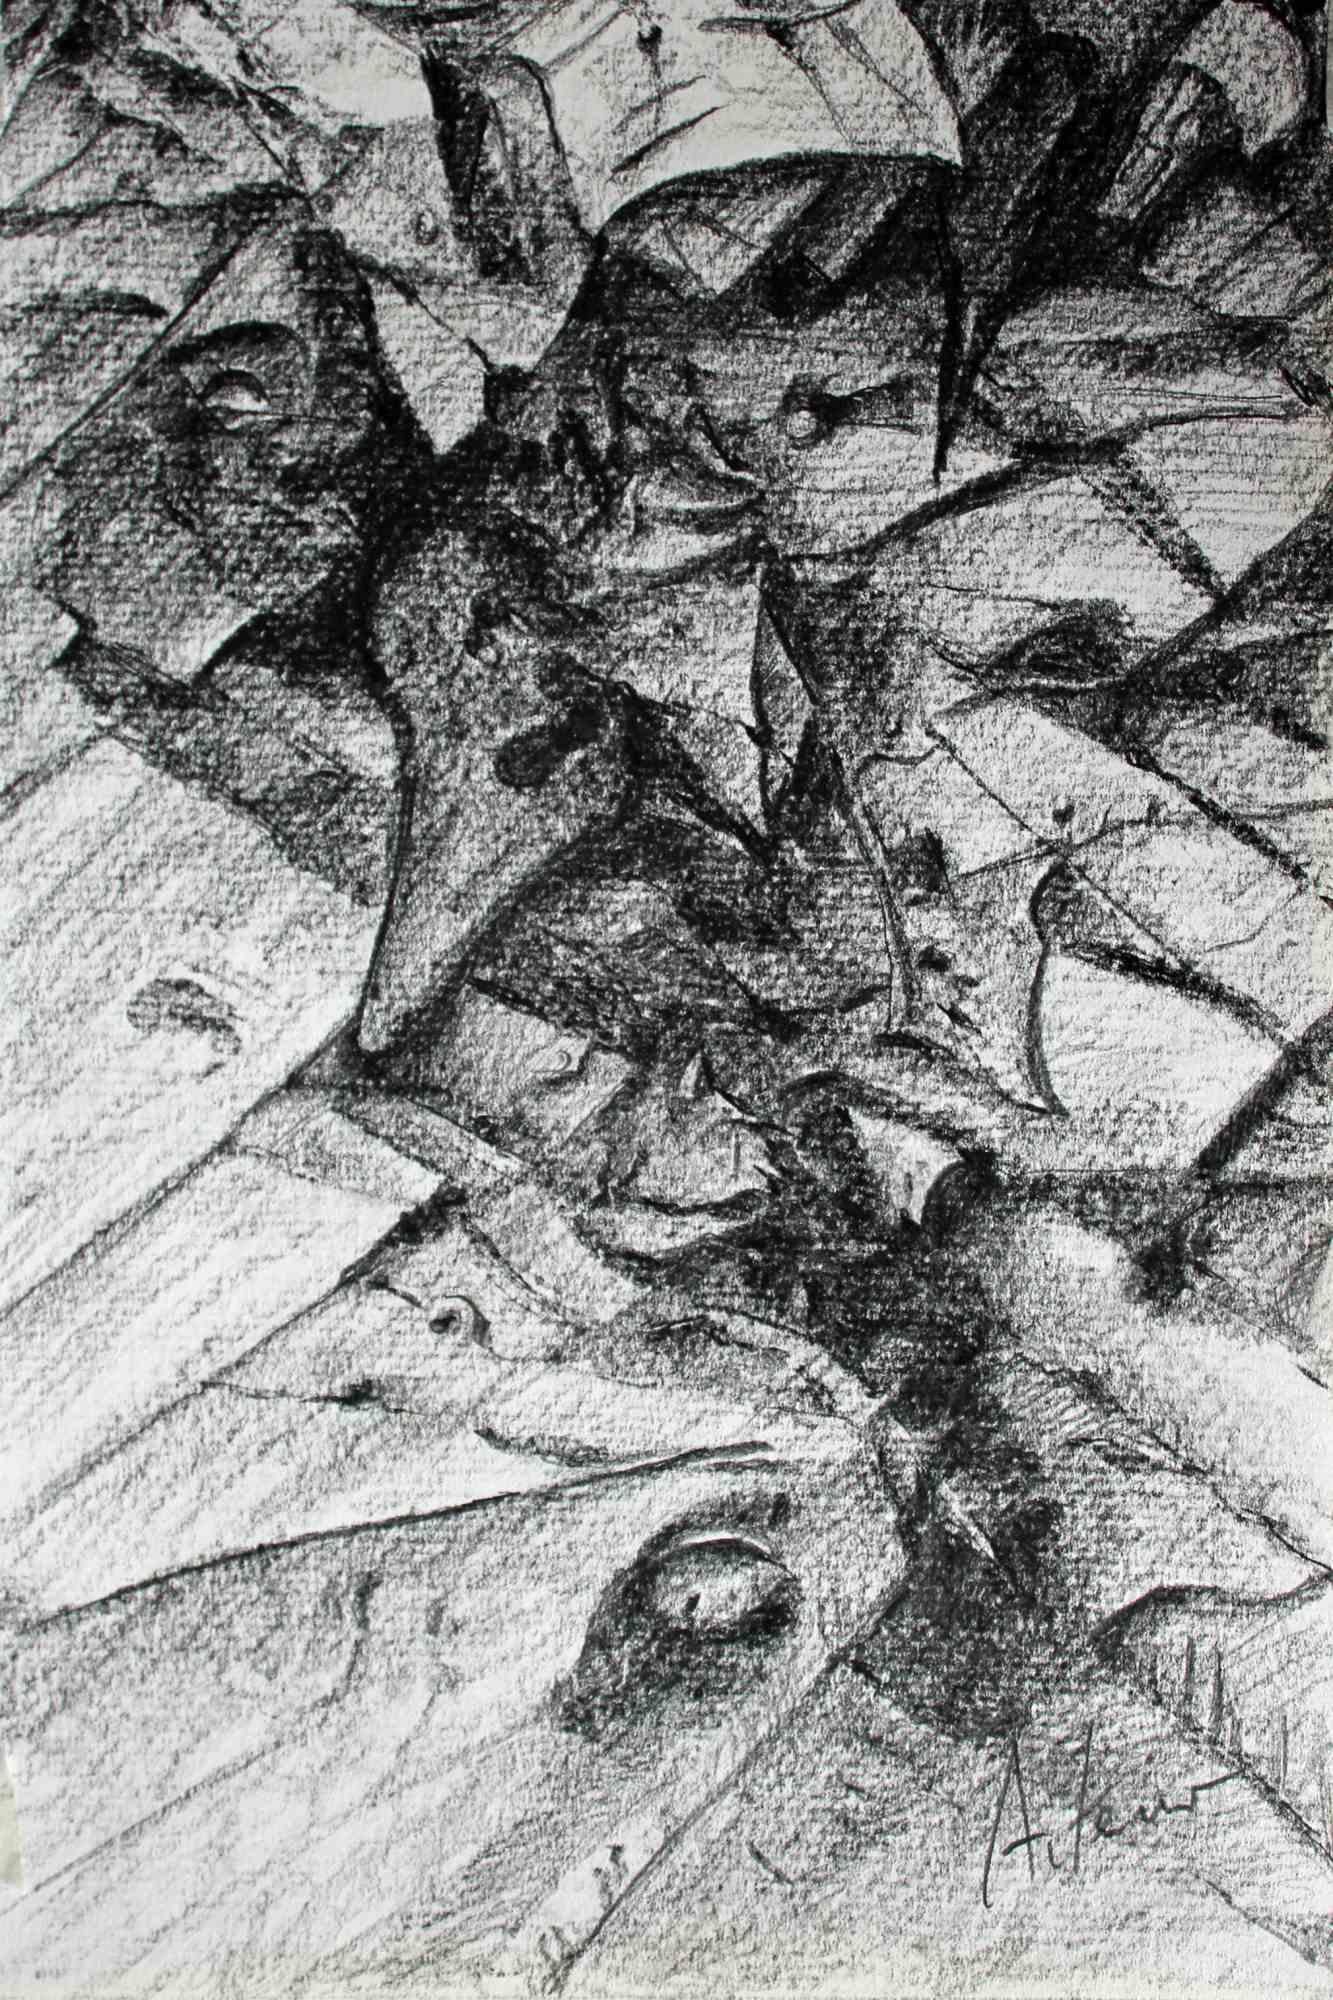 Surreal Landscape in Drawing 2 - Drawing by Artemio Ceresa - 2018